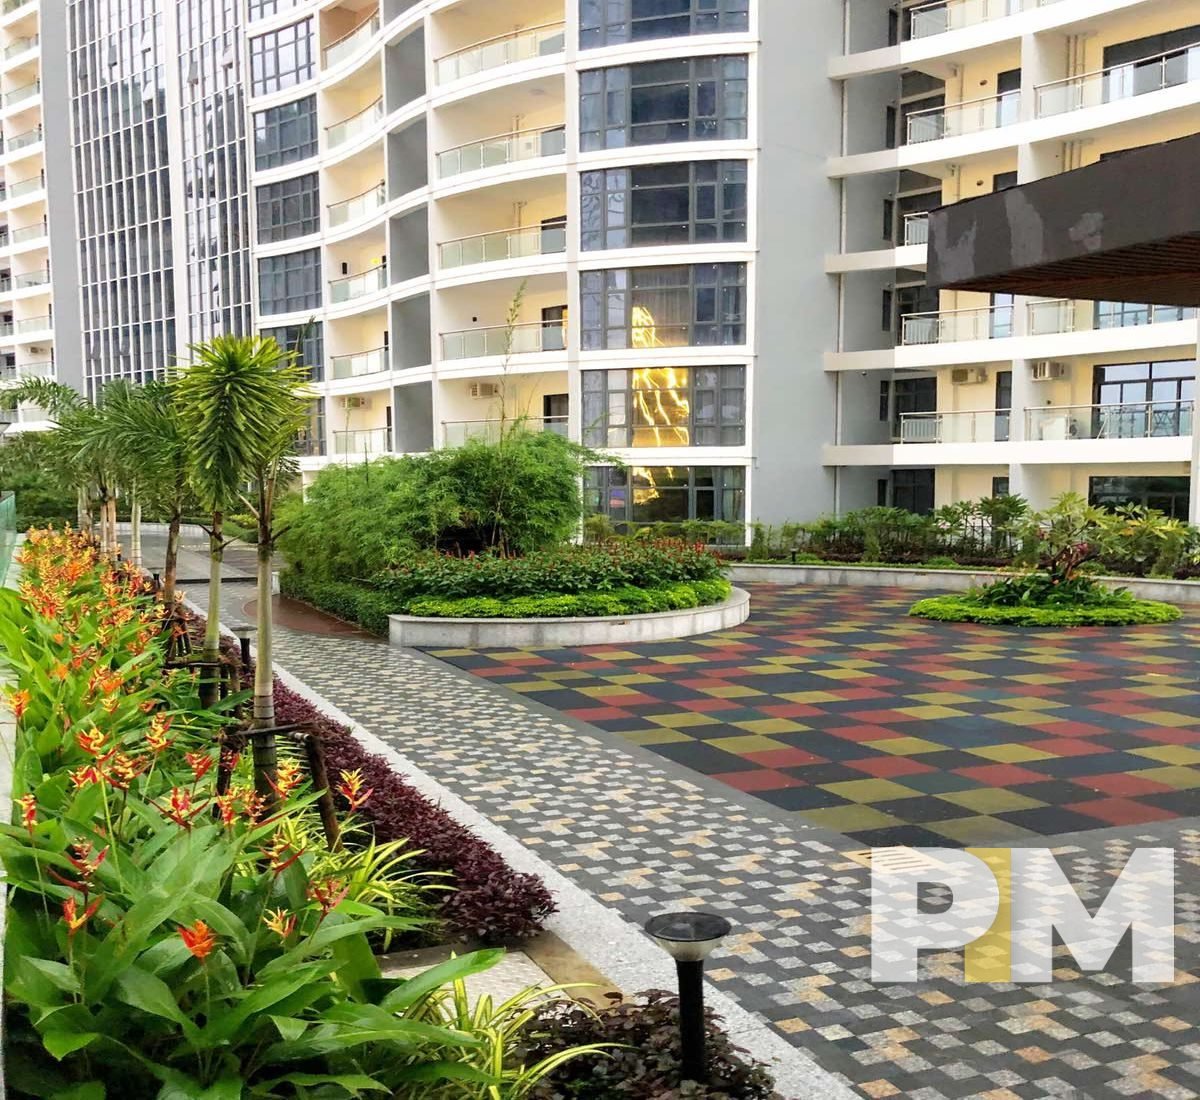 outdoor space - Condo for rent in Kamayut